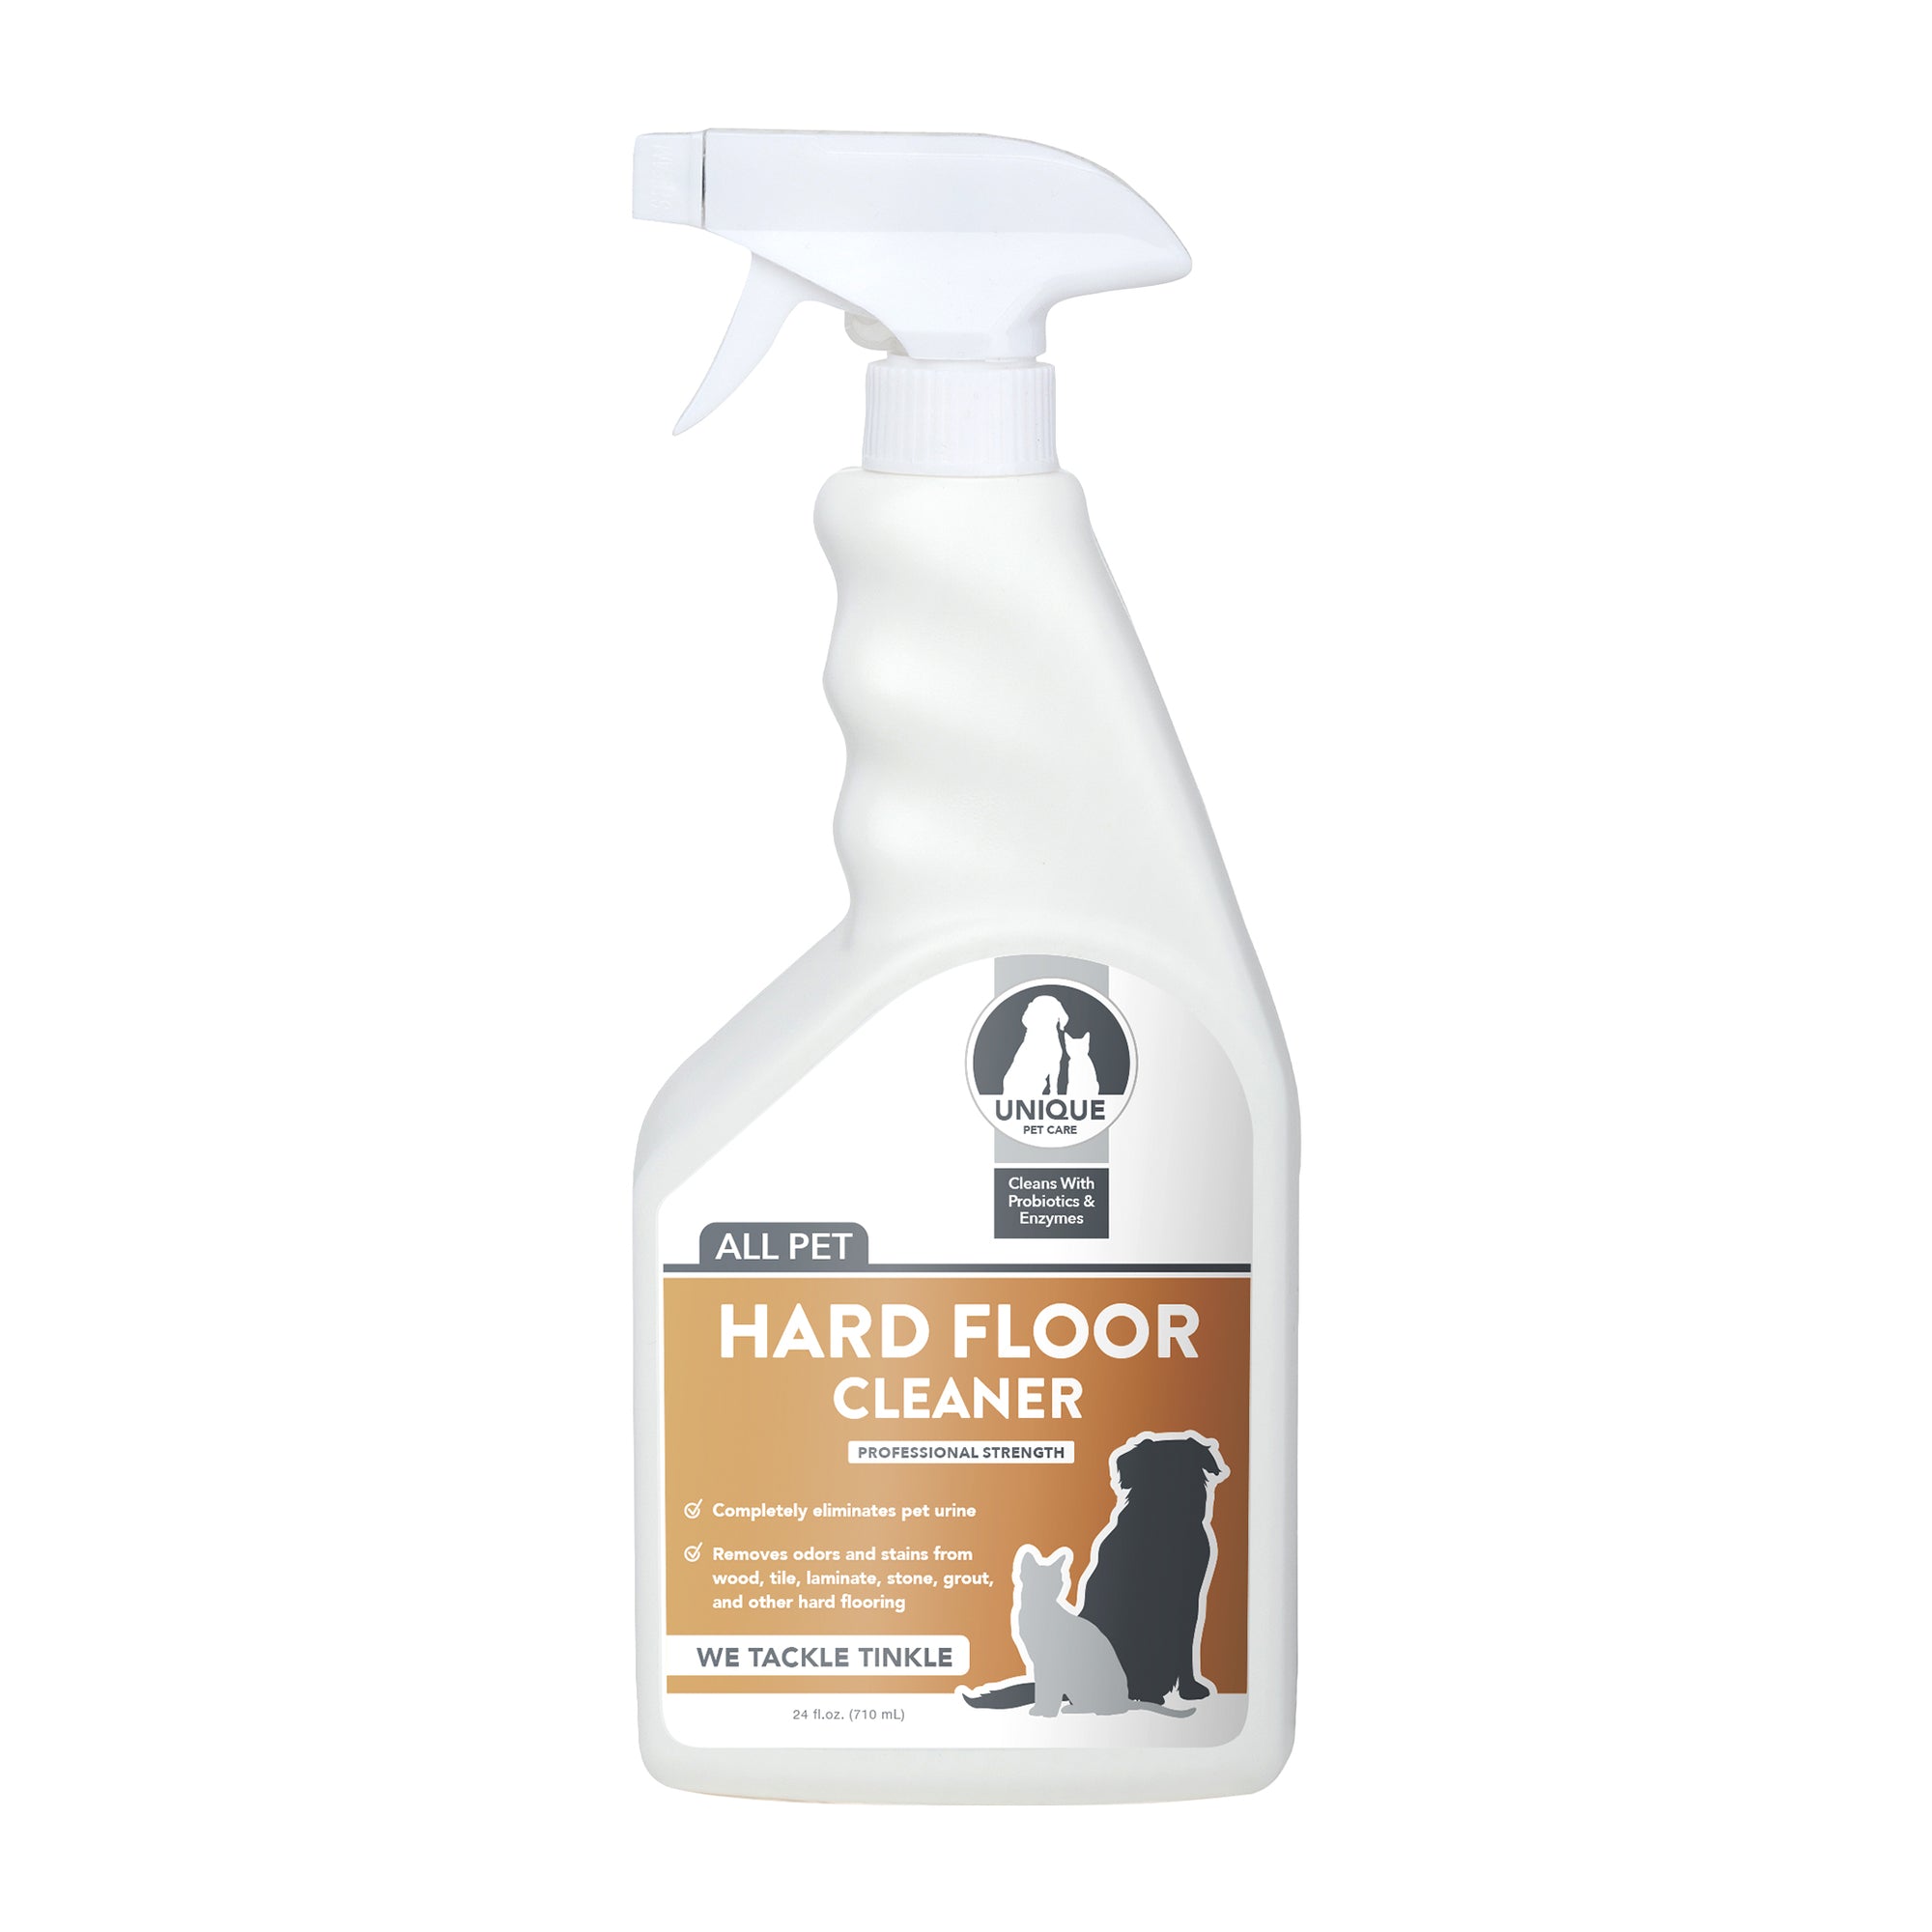 Unique Hard Floor Cleaner works on all hard surfaces to remove stains and odors. Unique Pet Care